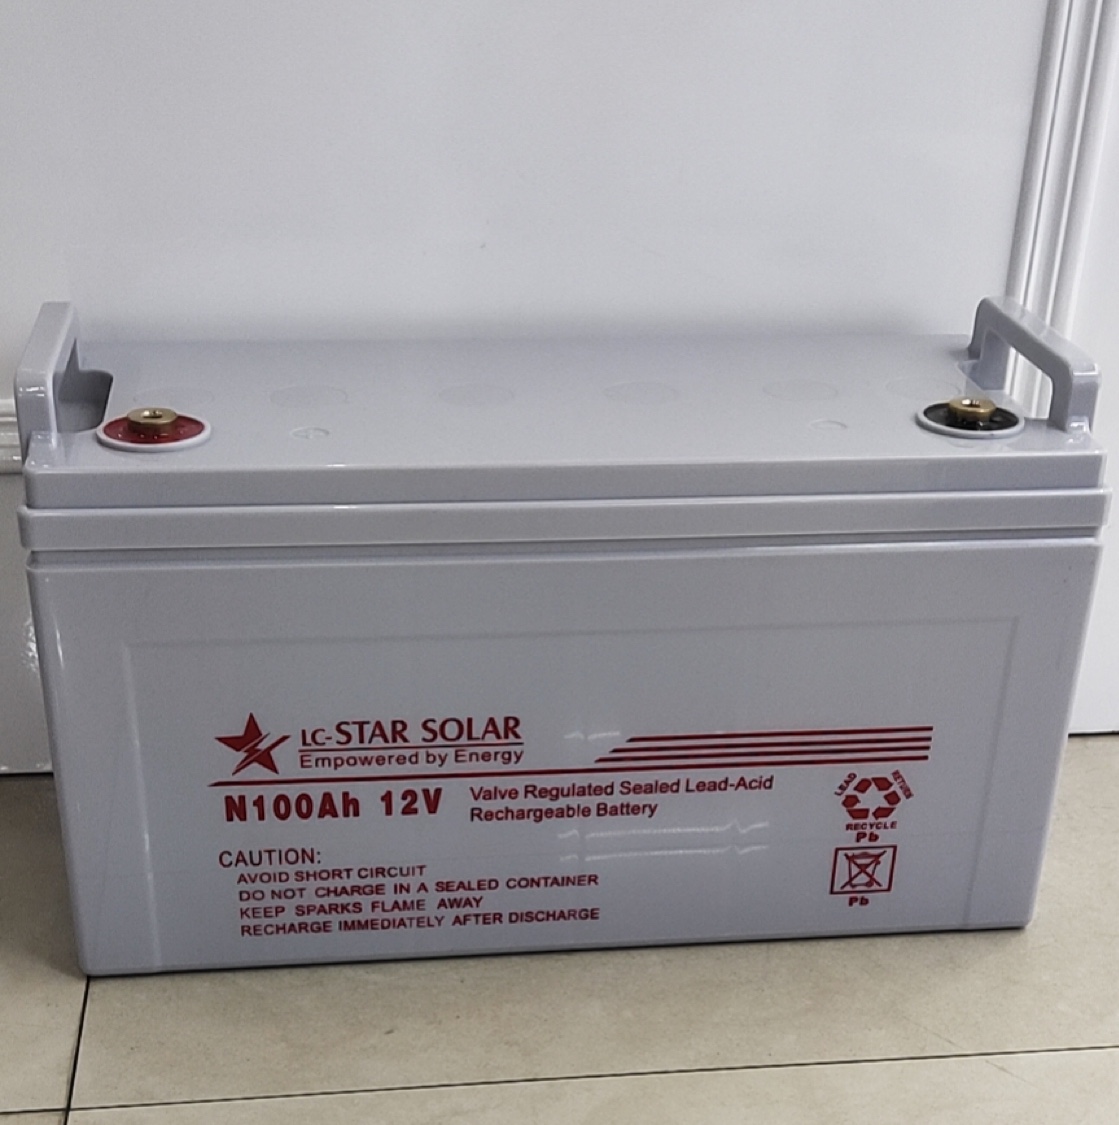 150A Lead acid battery good quality without glass